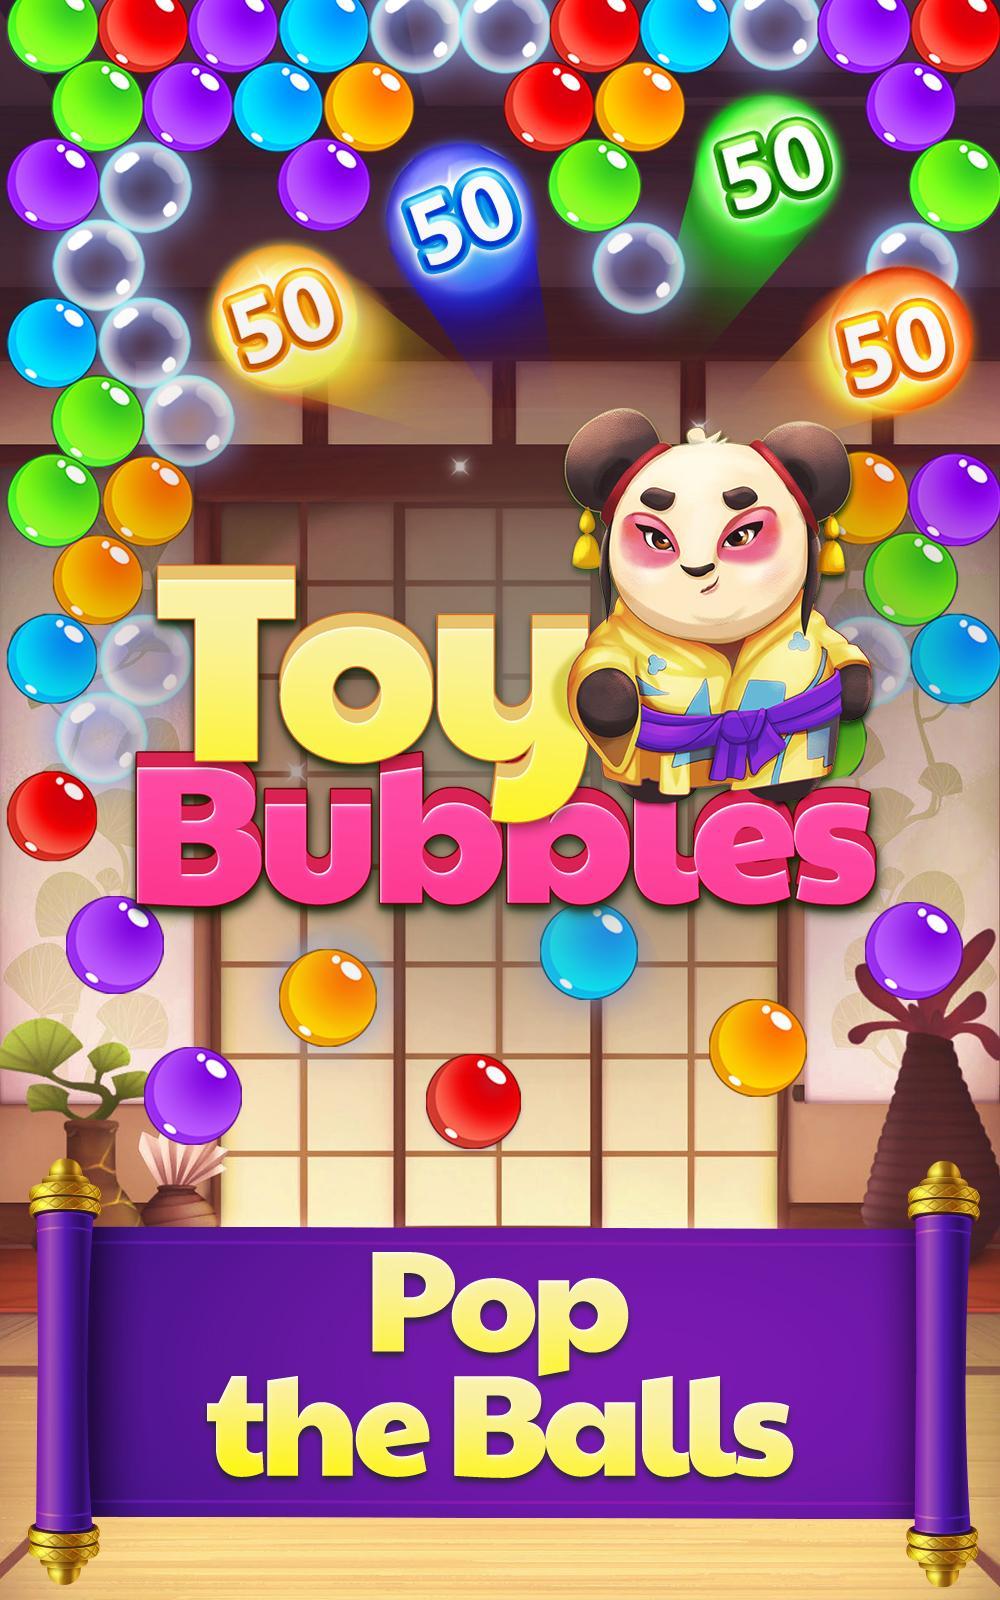 Toy Bubbles screenshot game